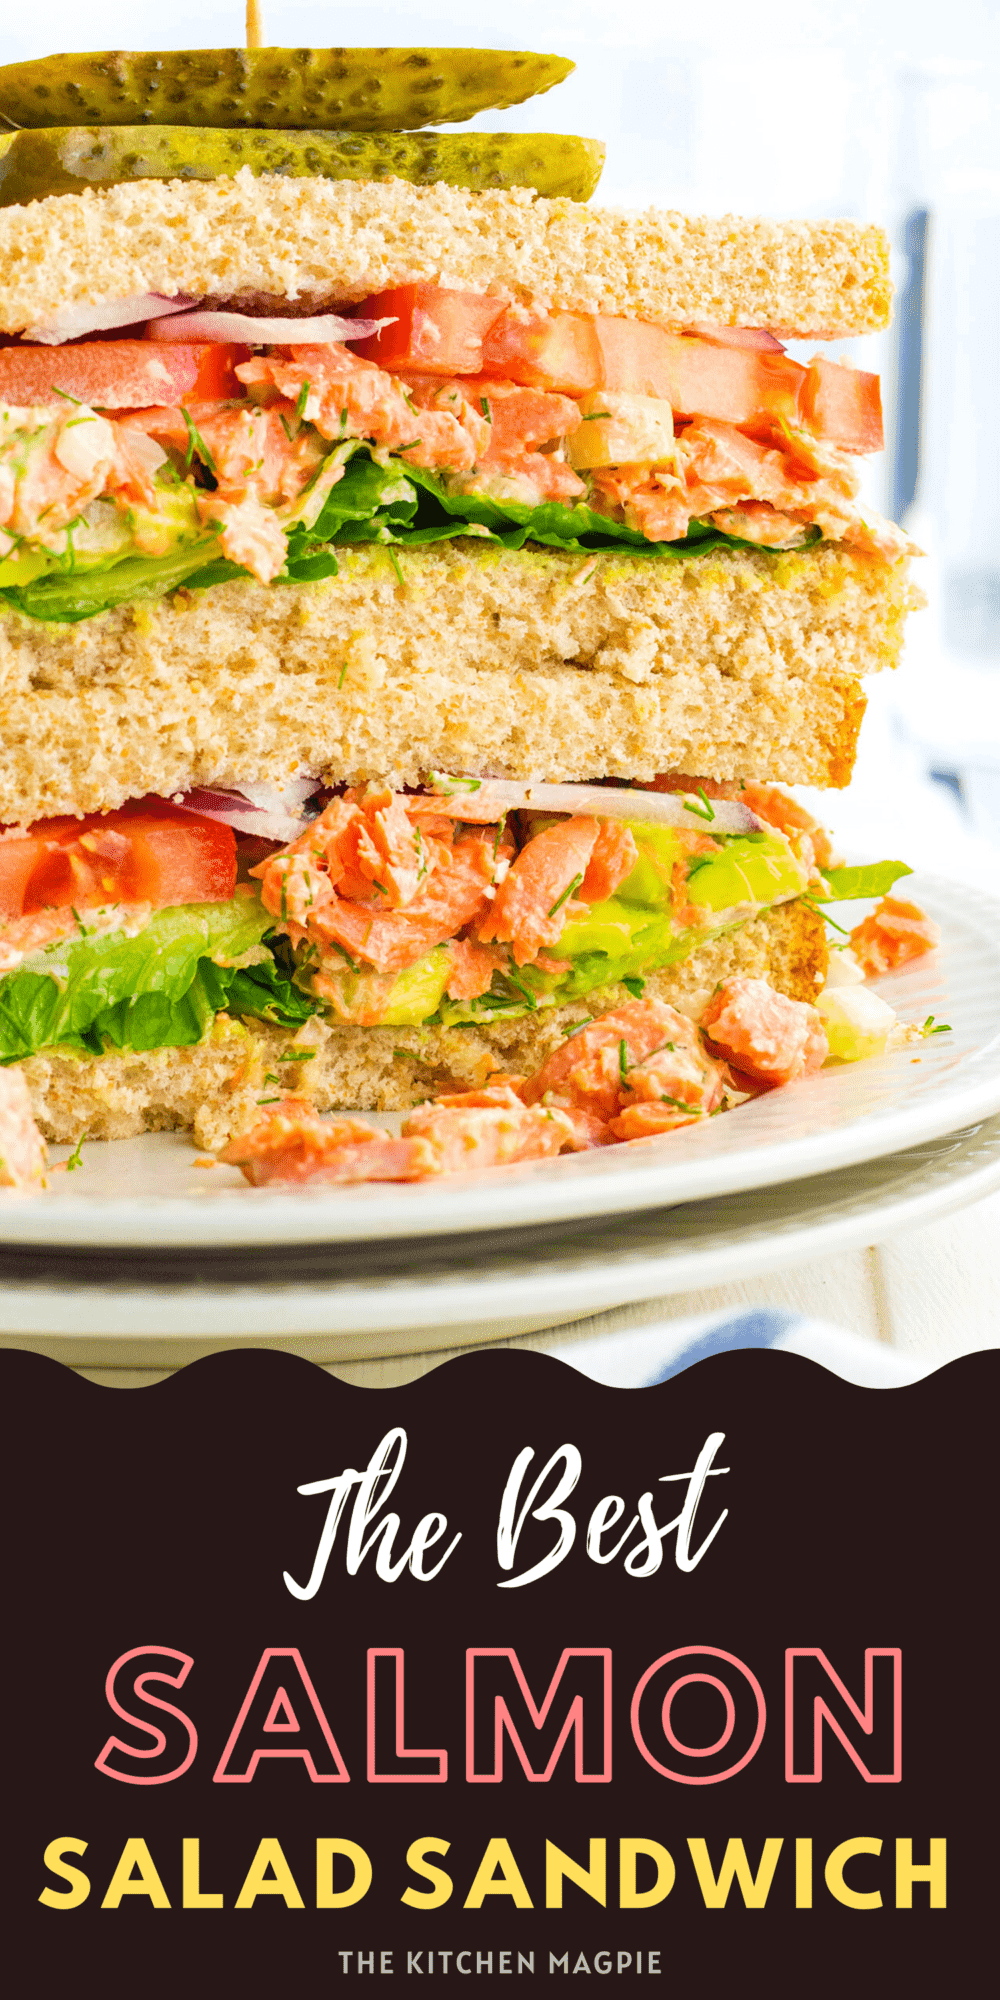 How to make a fantastic salmon salad sandwich with easy, delicious freshly poached salmon made into a salad, then sandwiched between soft bread, tomatoes and lettuce!